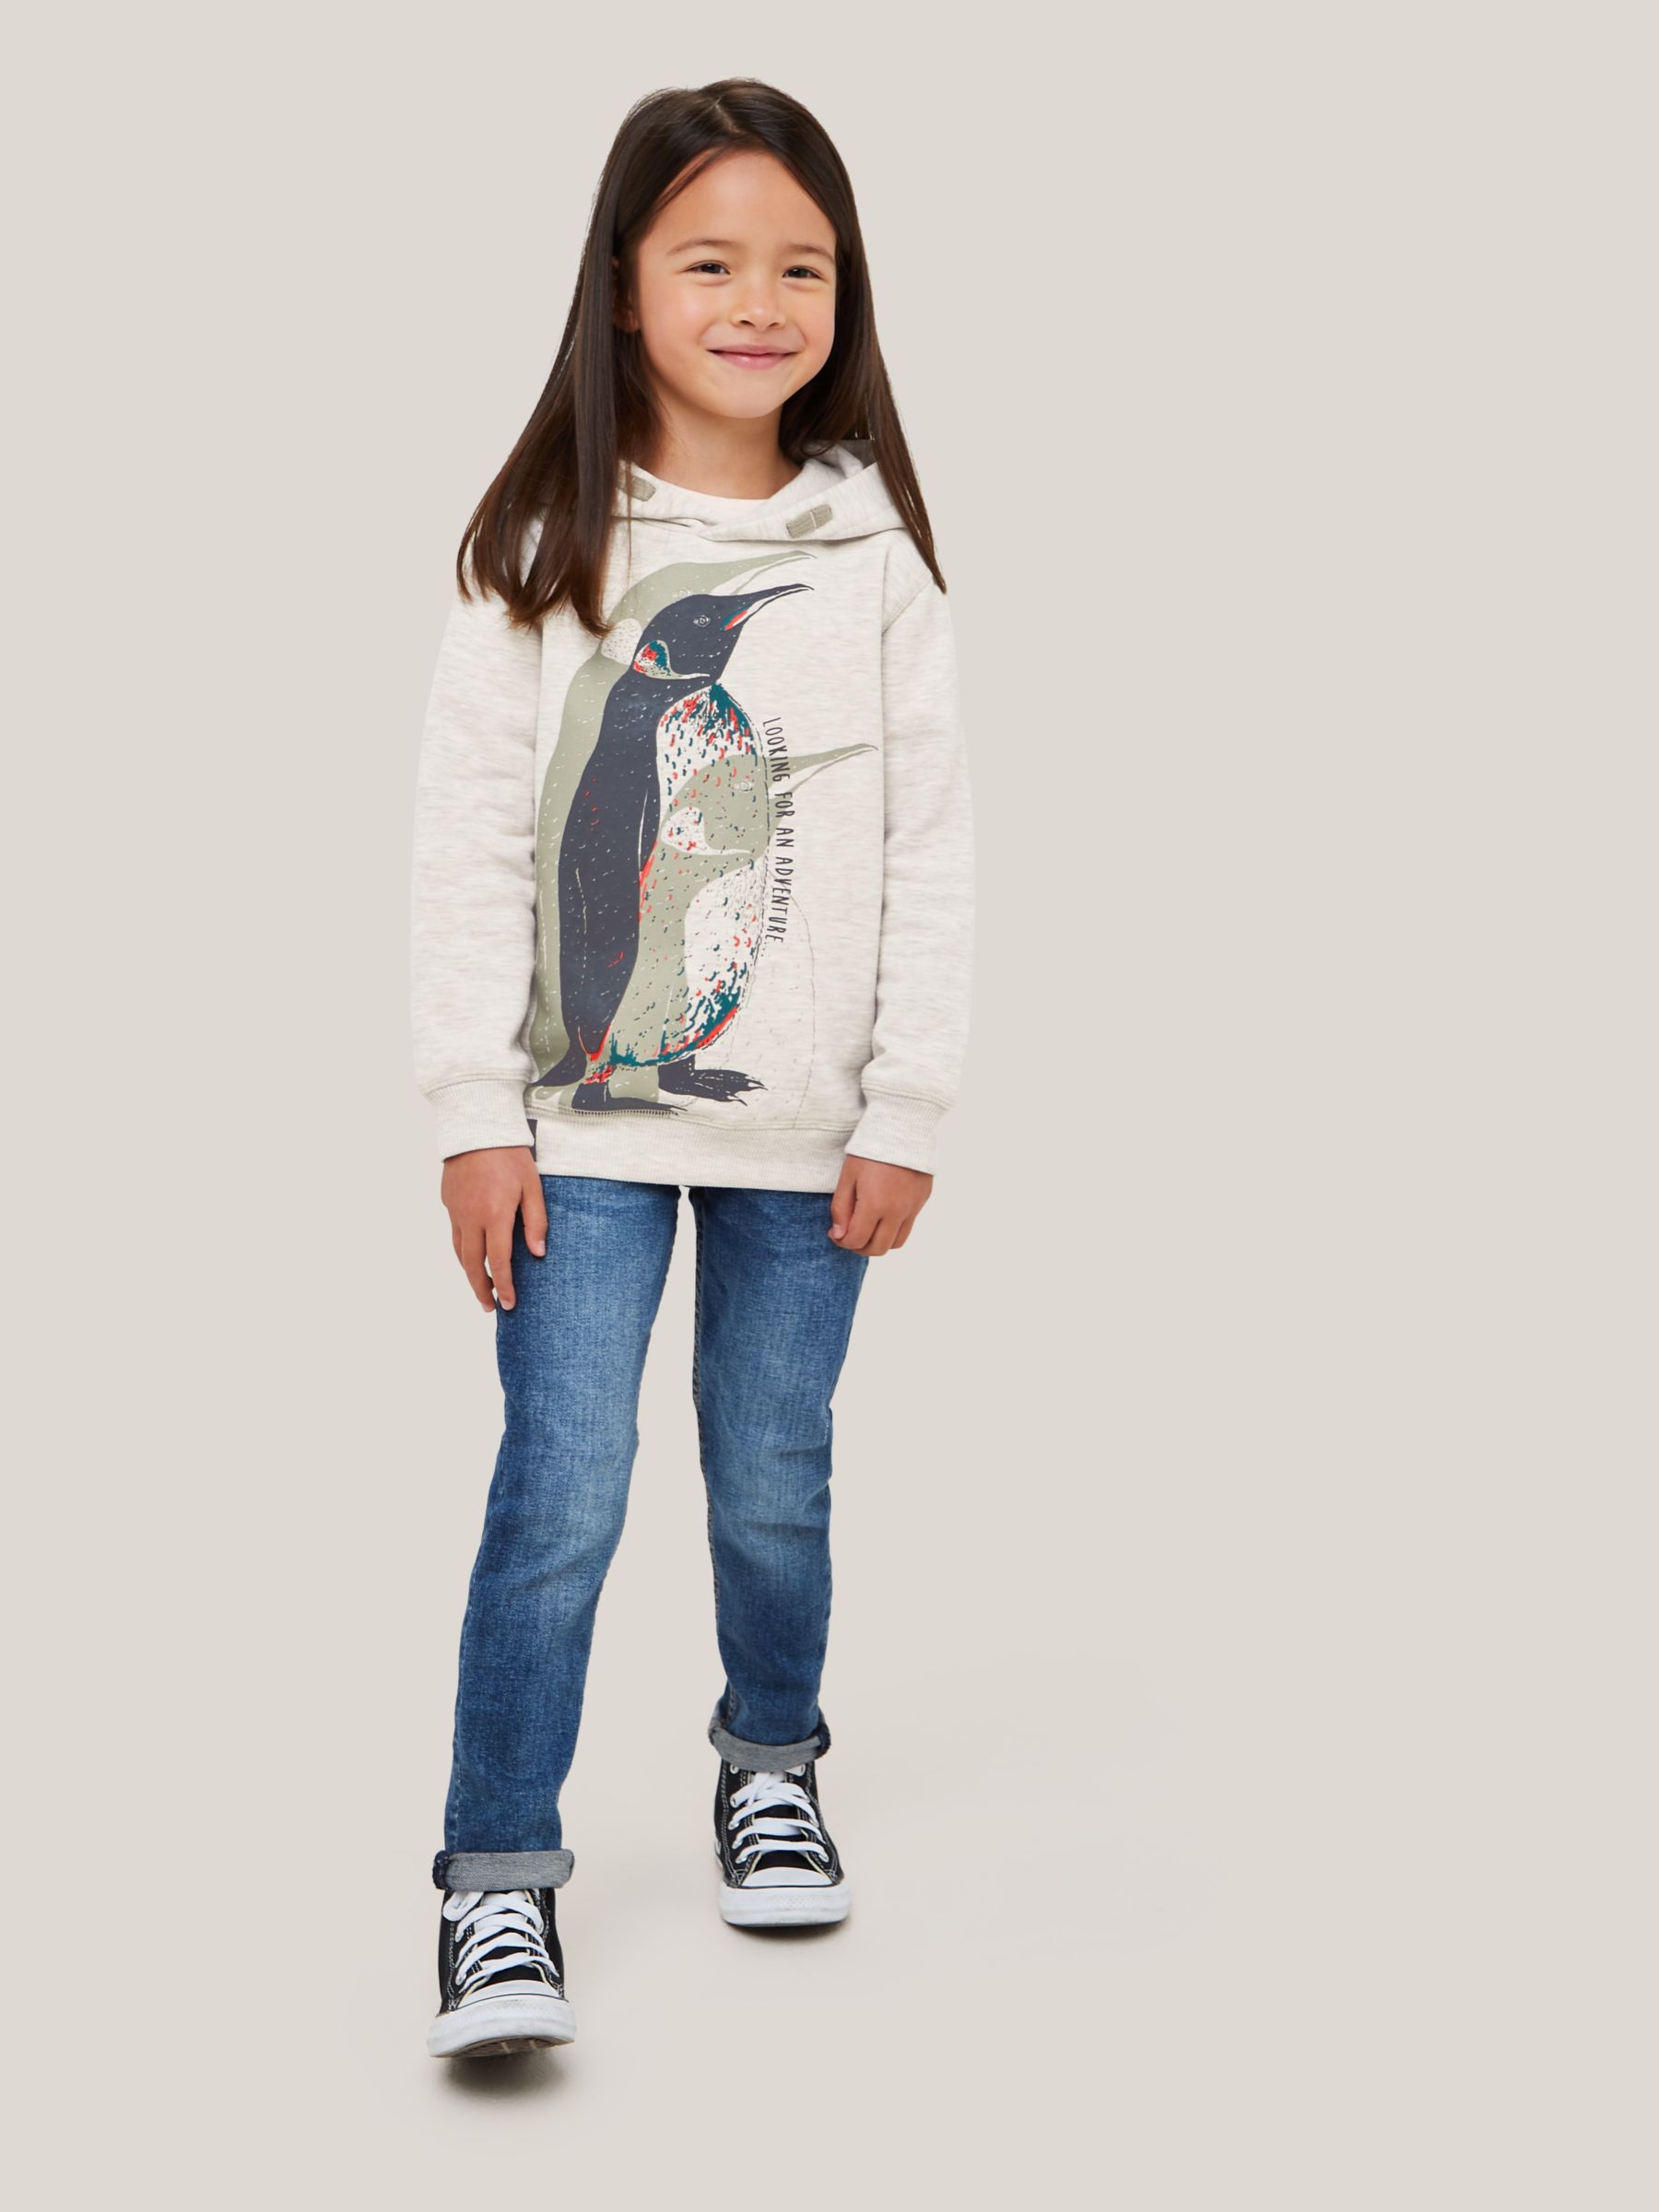 Natural History Museum Dino Files Boys Pullover Hoodie Official Merchandise 